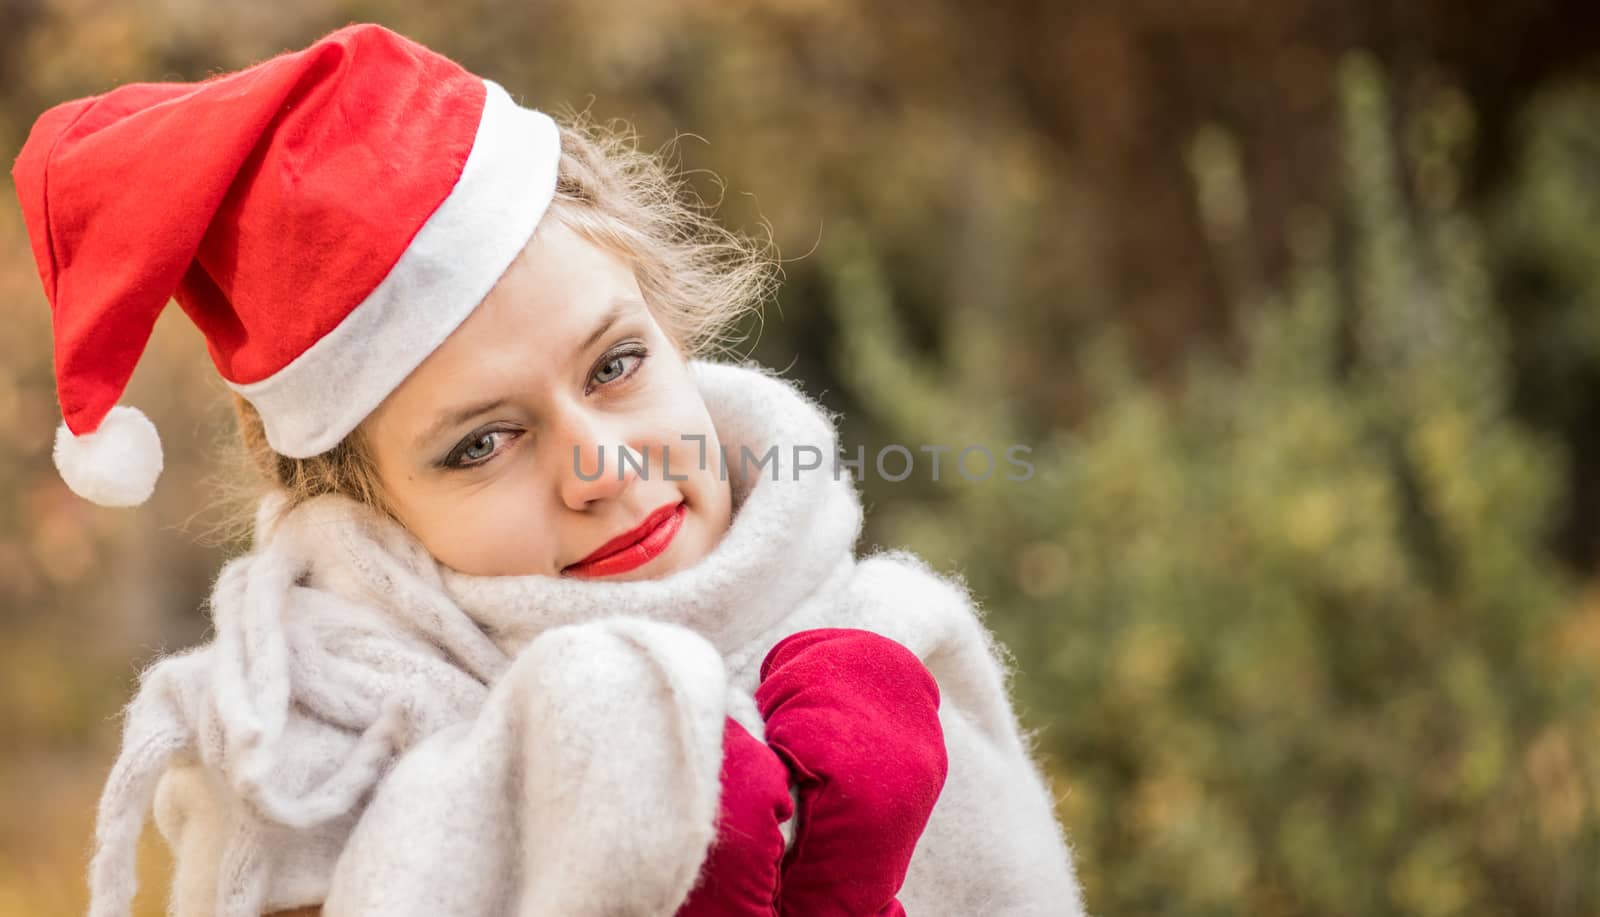 christmas concept. european woman wearing warm clothes and christmas hat outdoors